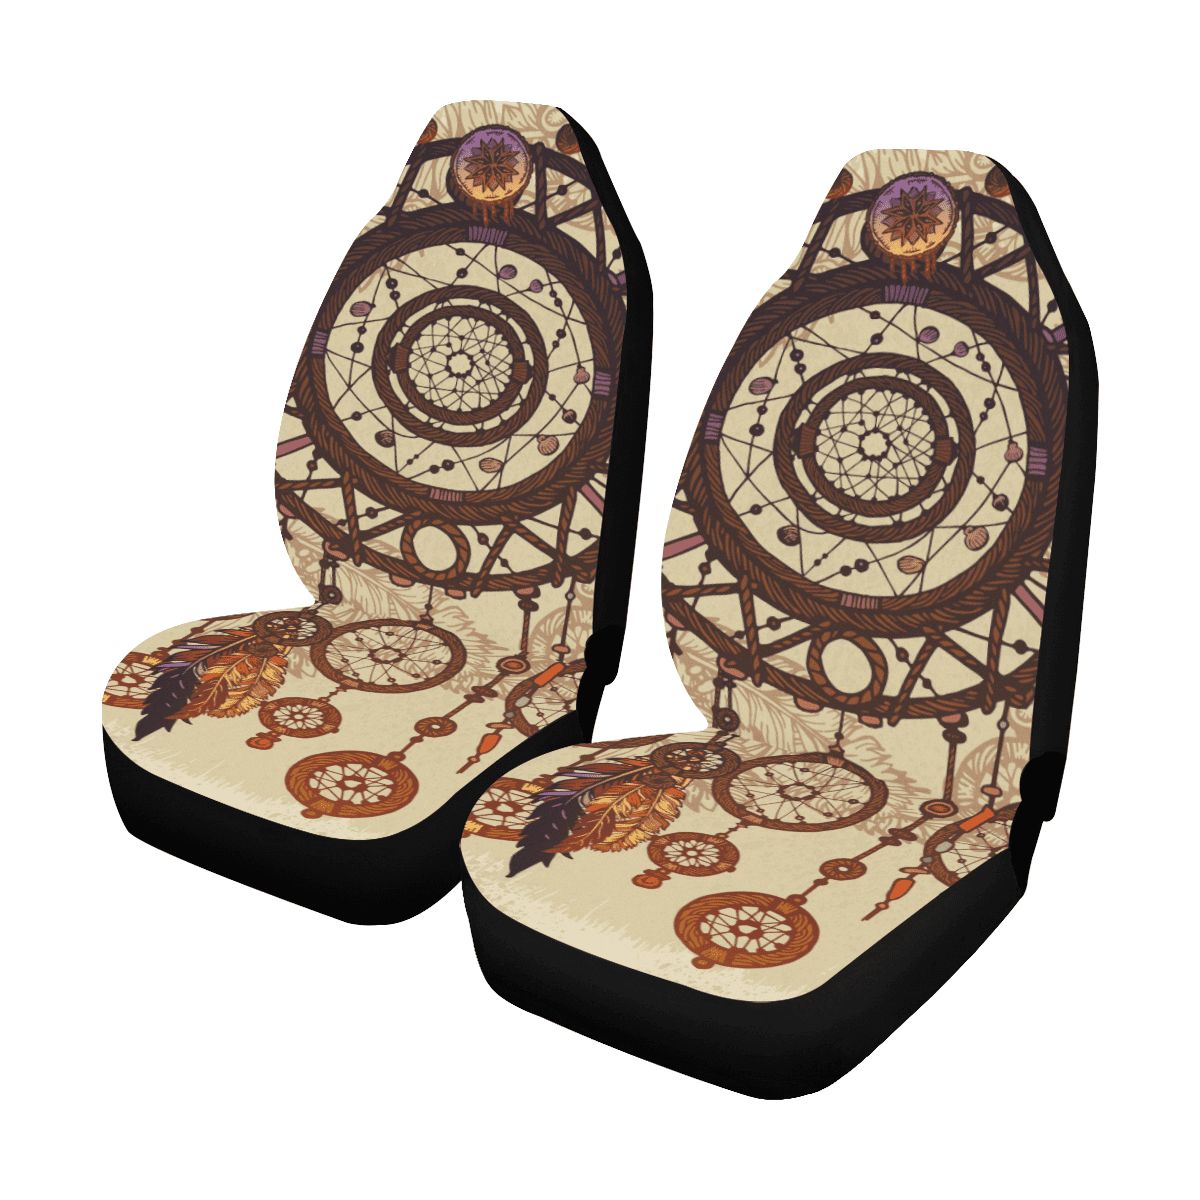 Seat Covers Hamsa Hand Black and White Car Front Seat Covers for Women Men Set of One Size Fit Most Vehicle,Cars,Sedan,Truck,SUV,Van 